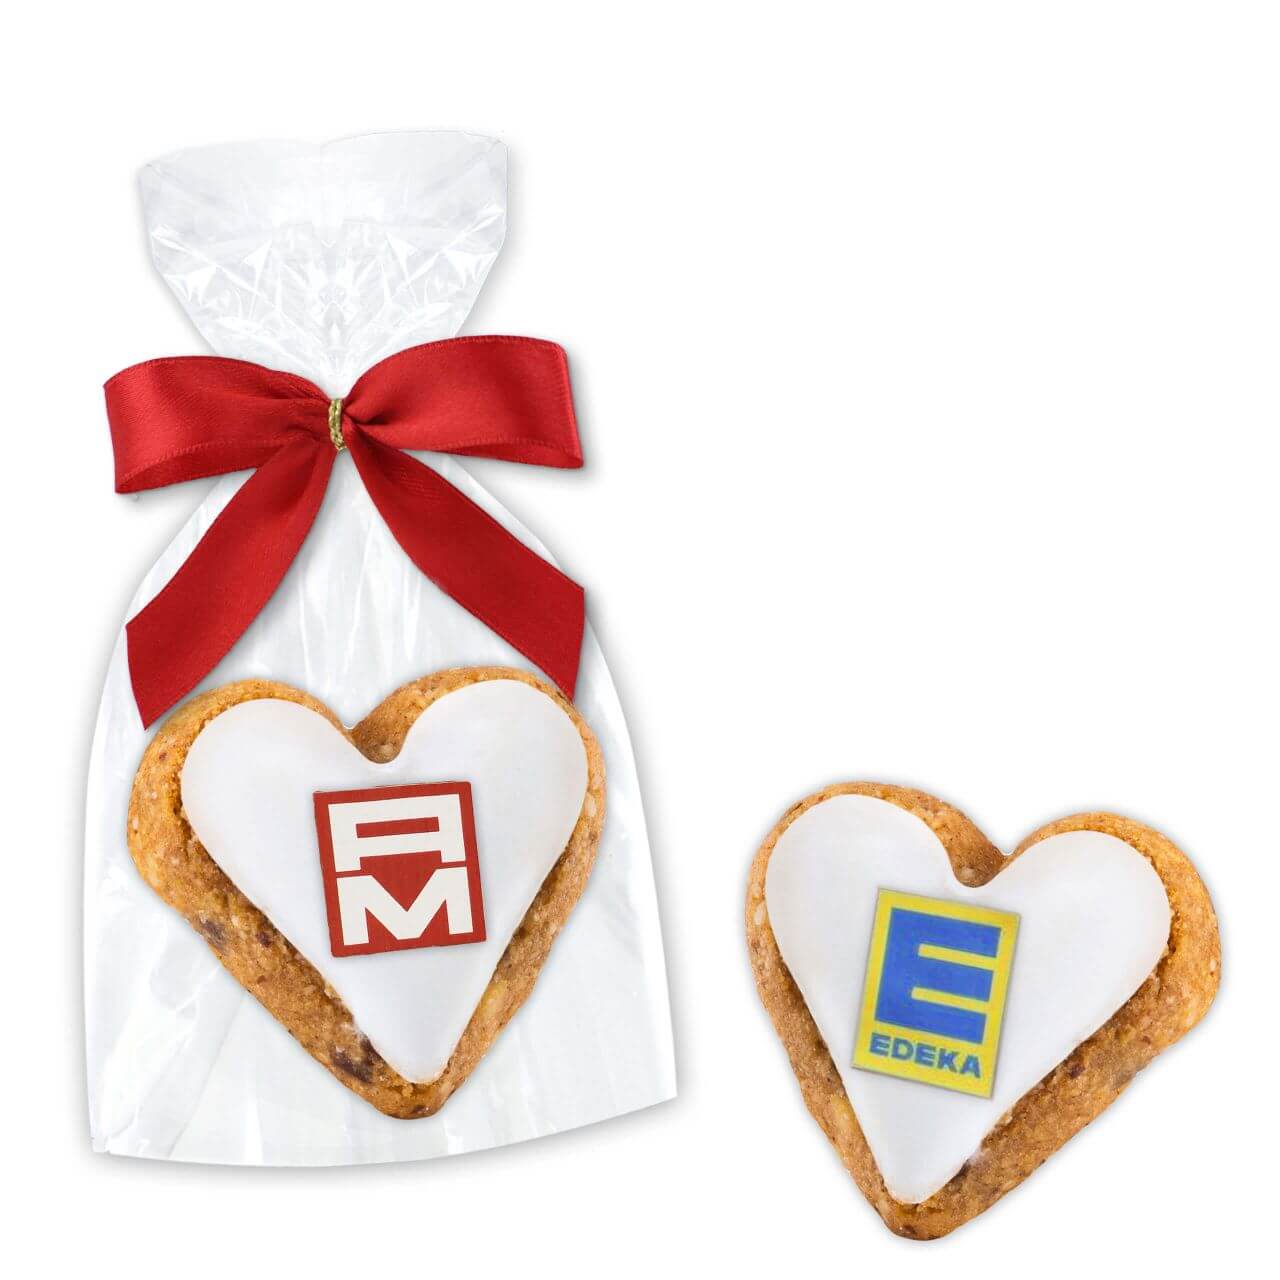 Cinammon heart Cookie incl. Logo - single packed